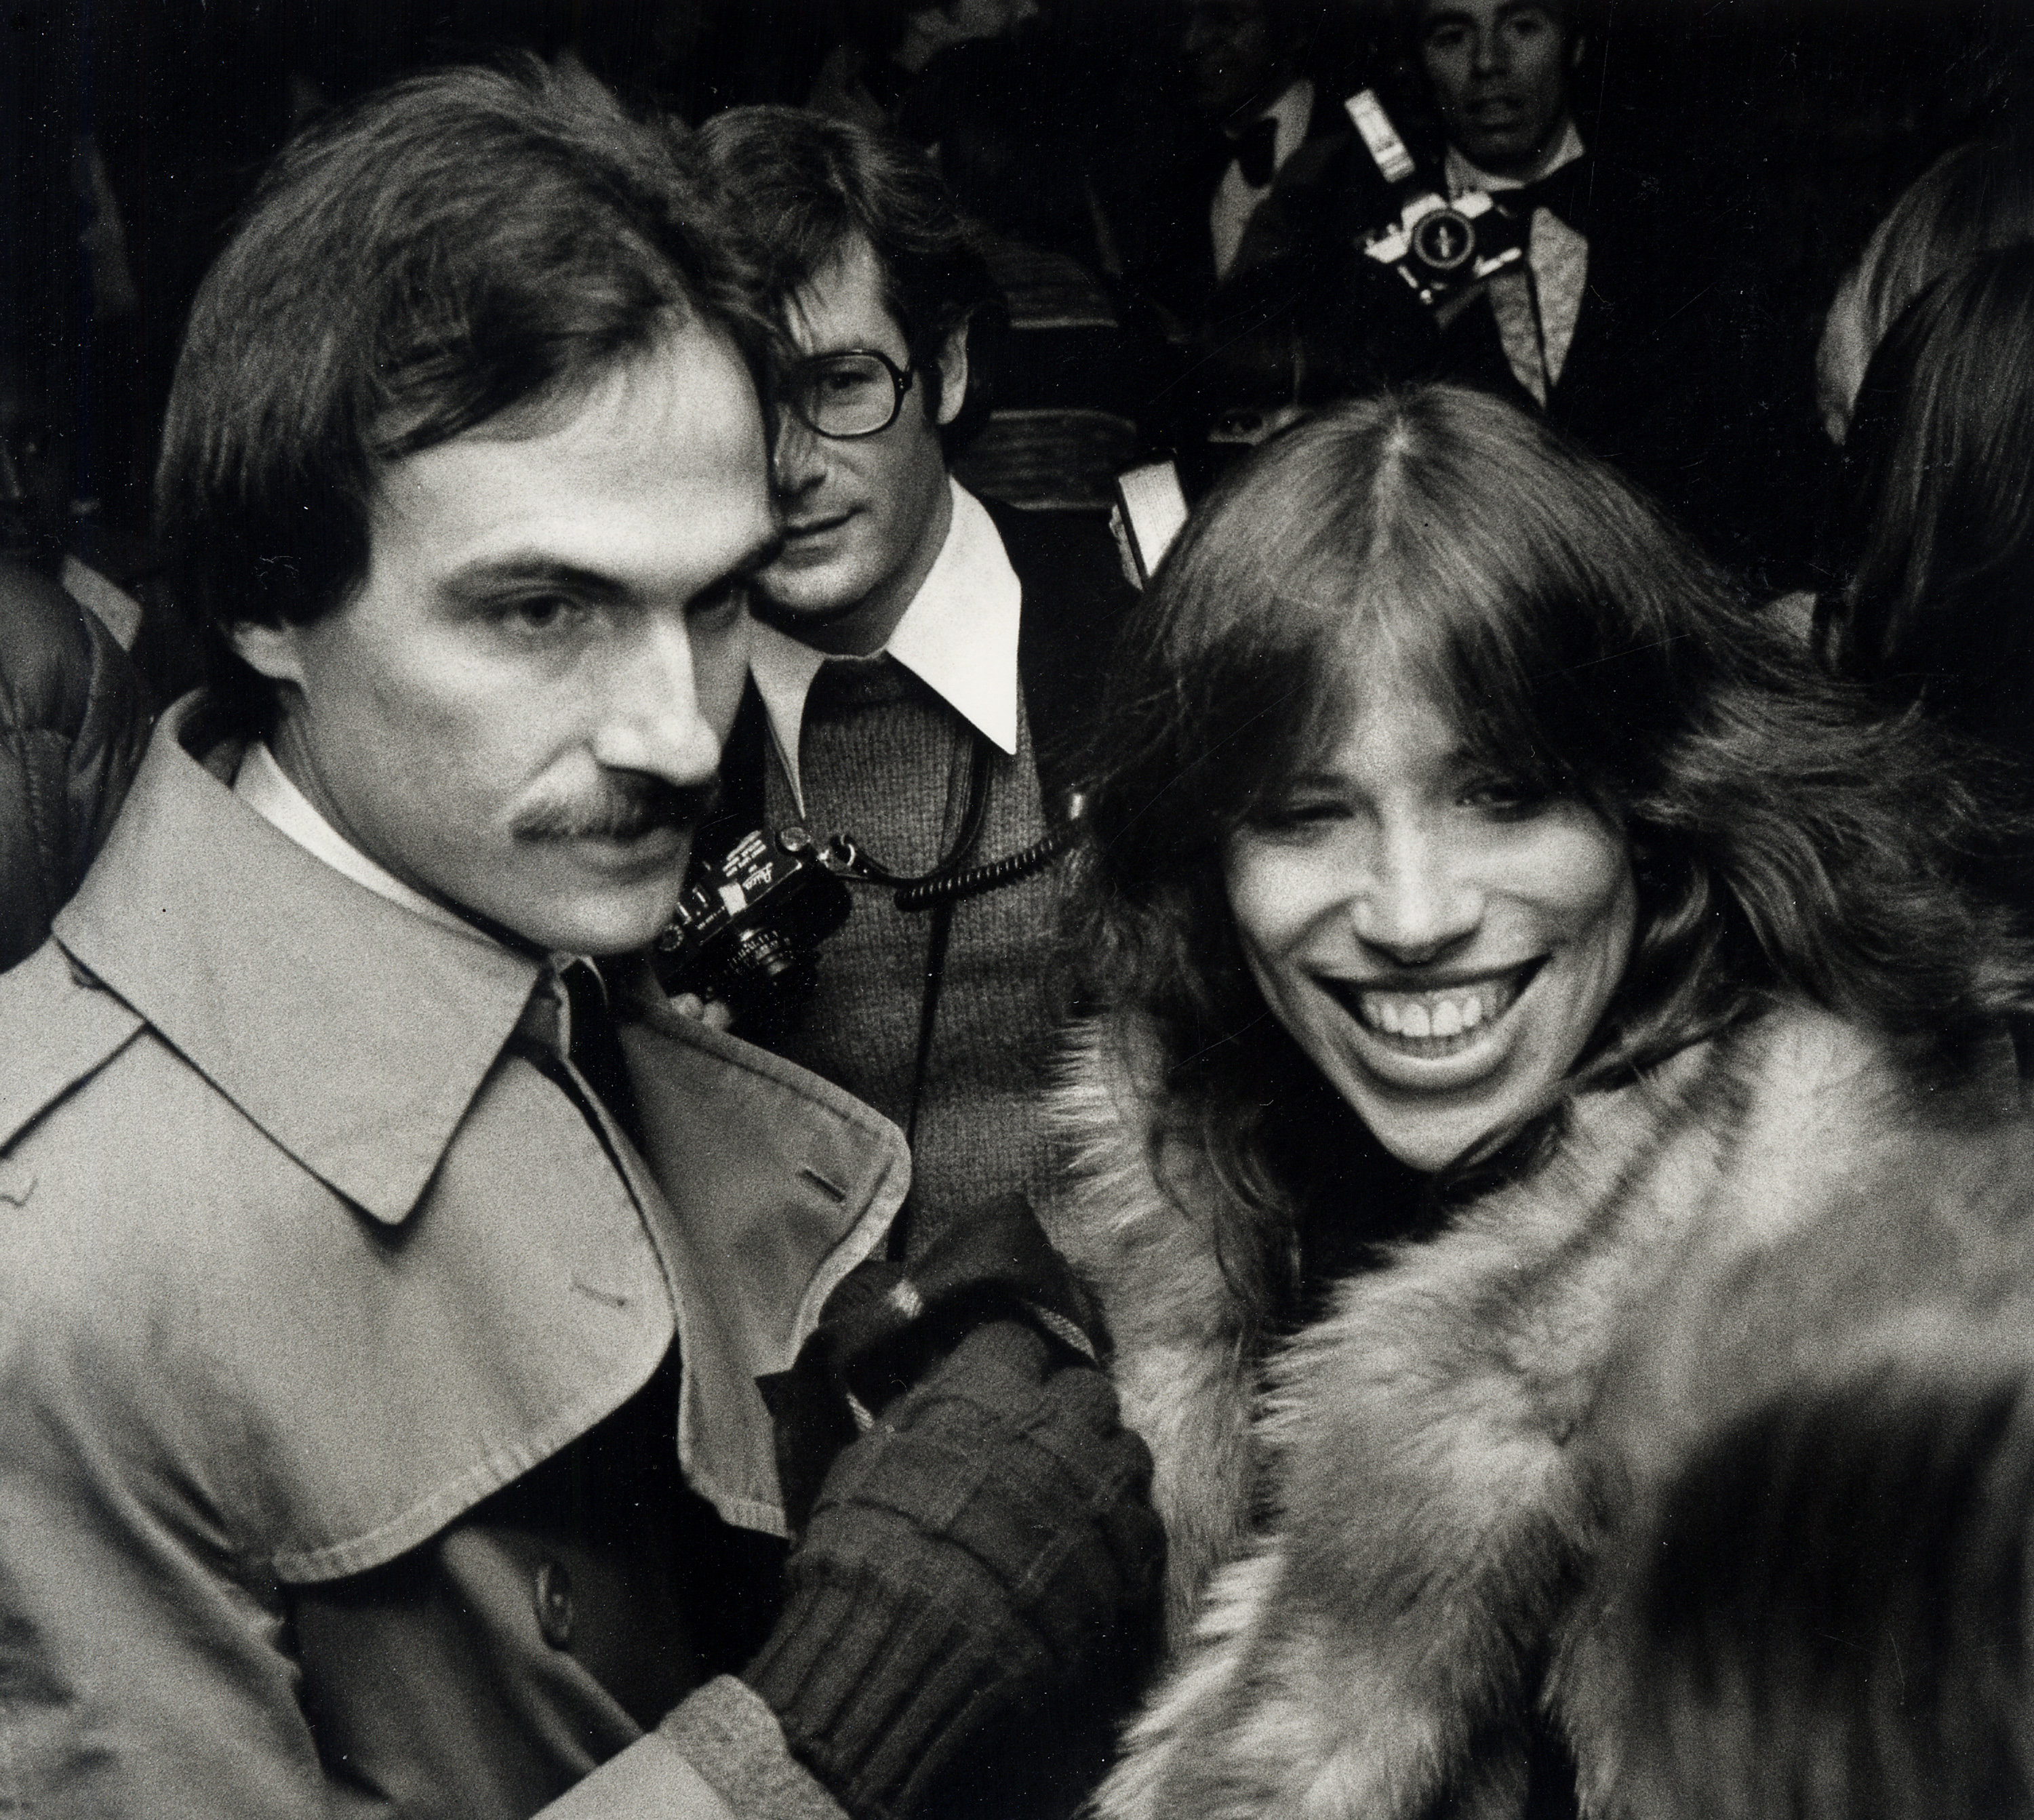 Carly Simon and James Taylor at the "Pumping Iron" premiere party held at the U.S. Steak House in New York City, New York, on January 17, 1977. | Source: Getty Images